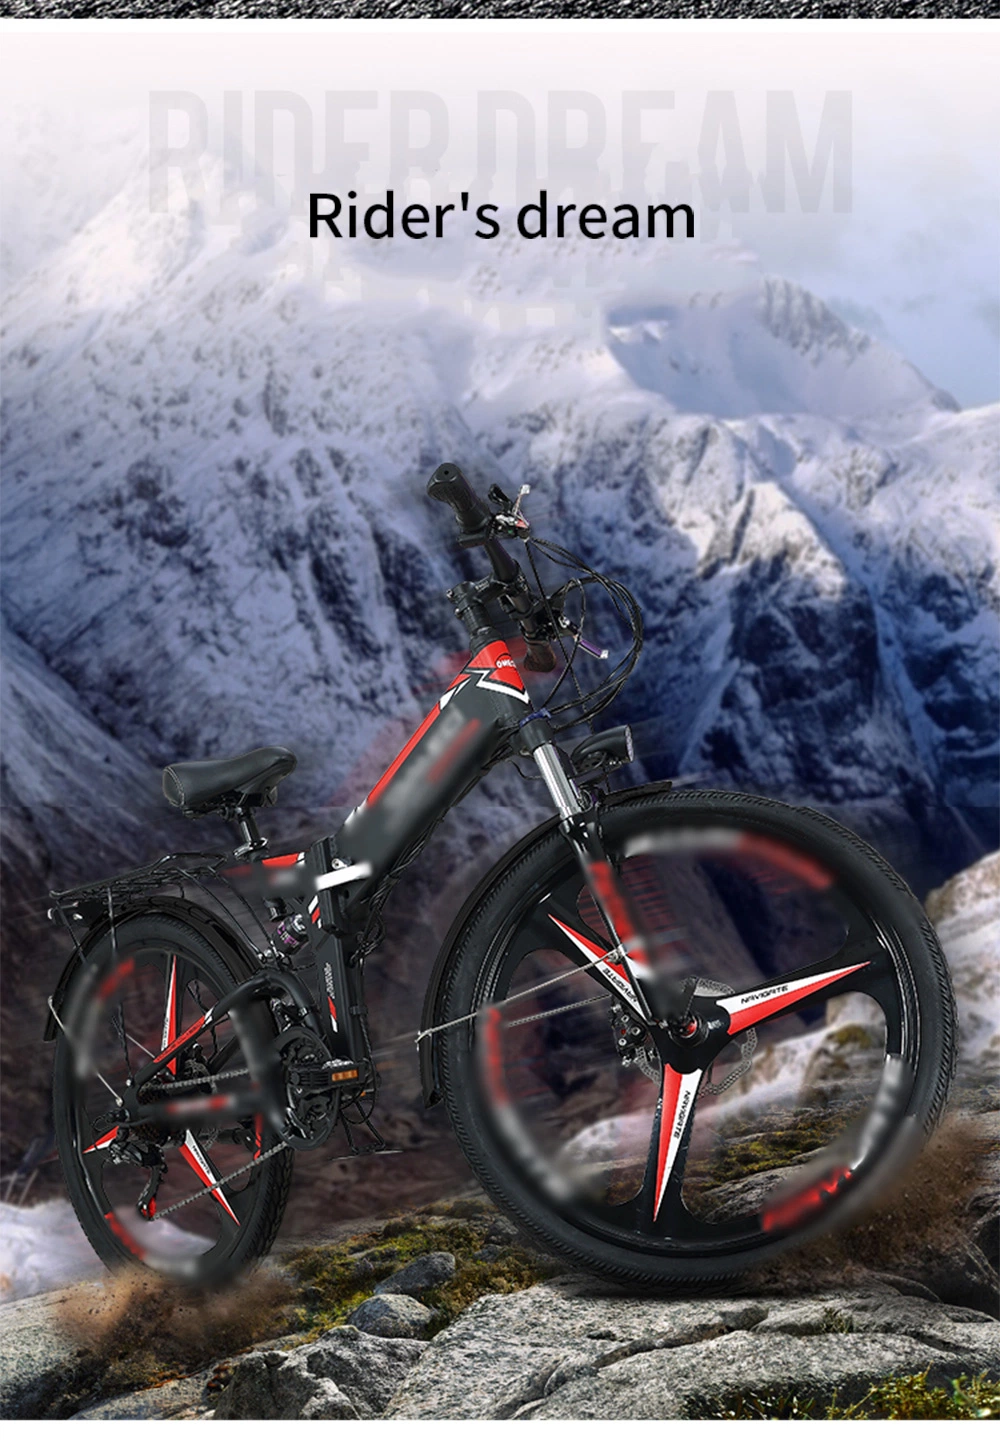 High Quality Ebike26" Folding Air Front Fork Rear Shock Ebike Hydraulic Electric Bicycle Full Suspension Electric Mountain Bike